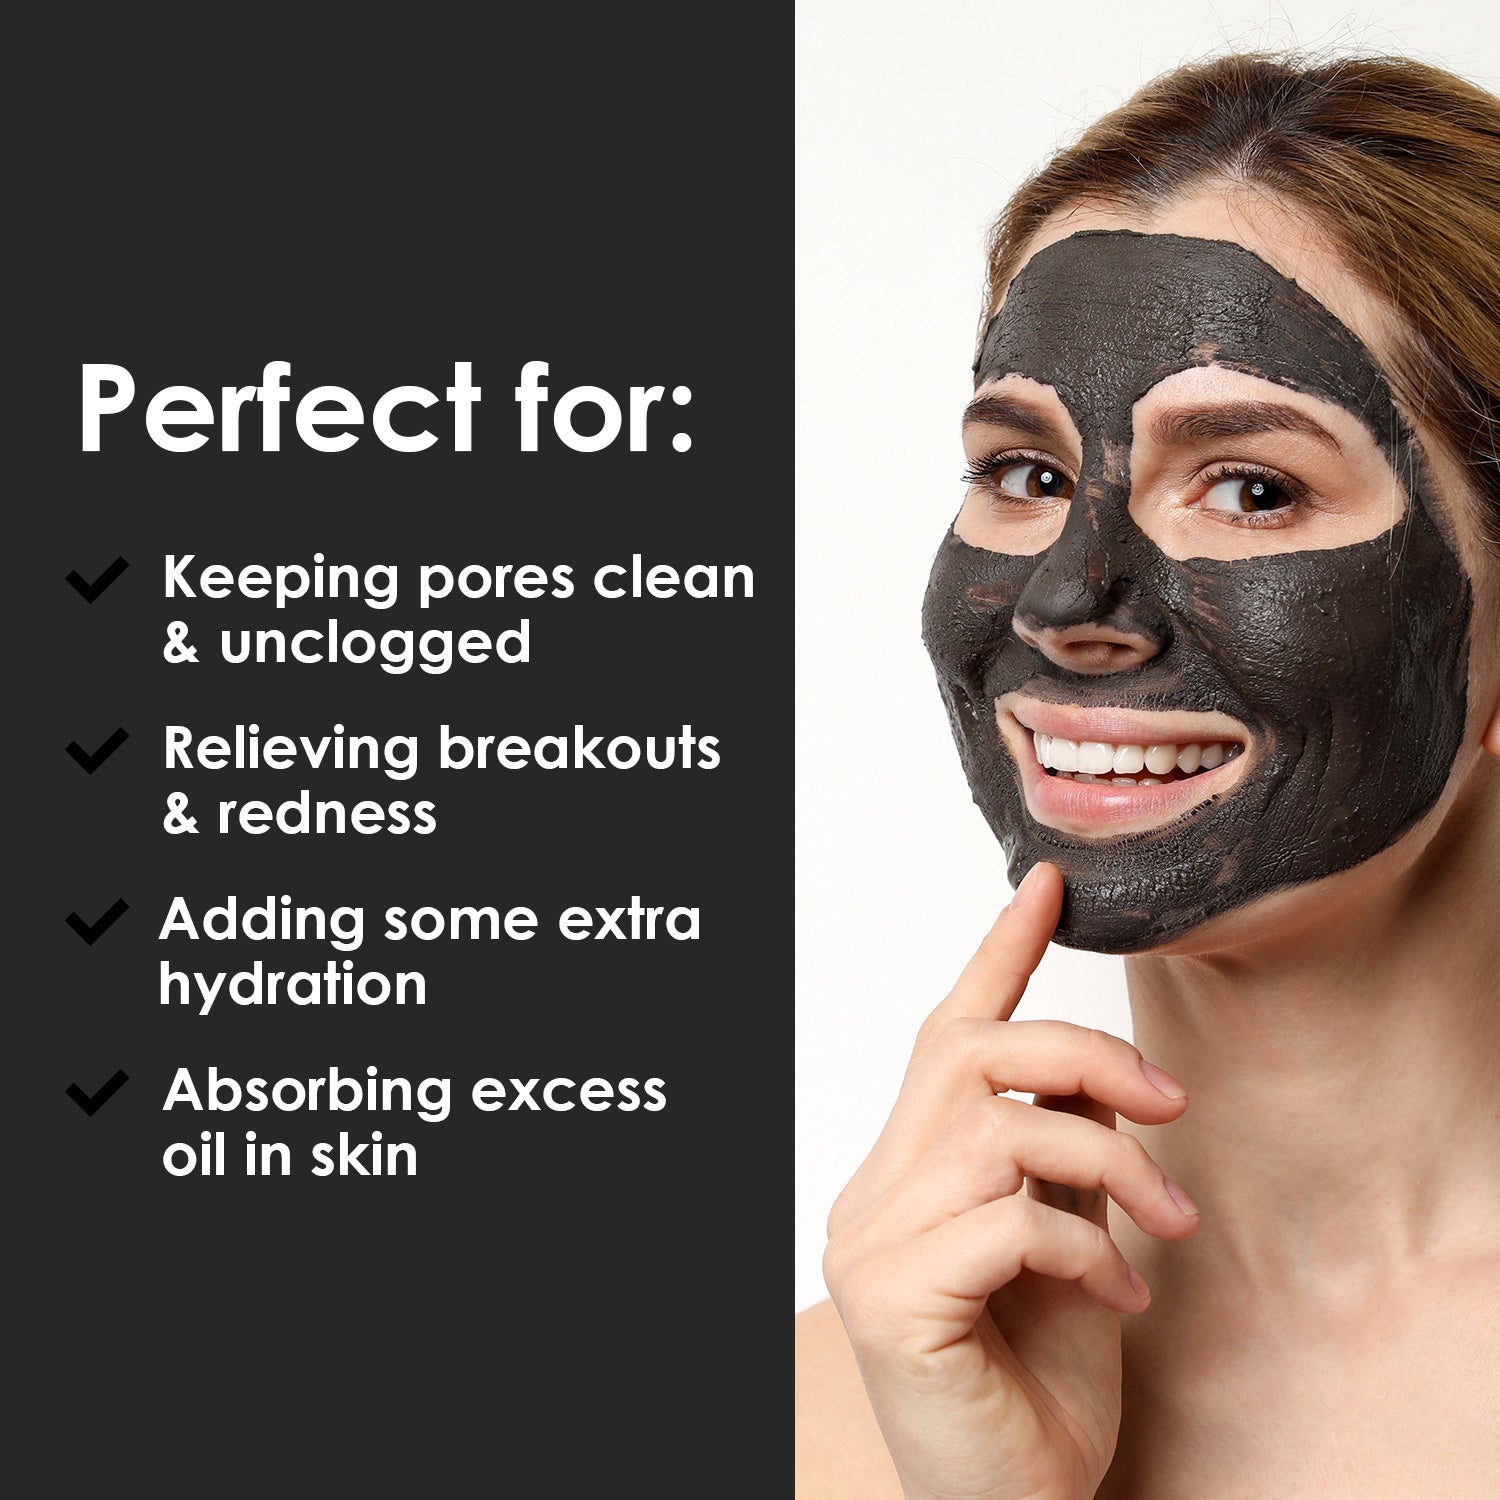 Dead Sea Mud Mask: Exfoliate Dead Skin and Reveal a Clear Complexion